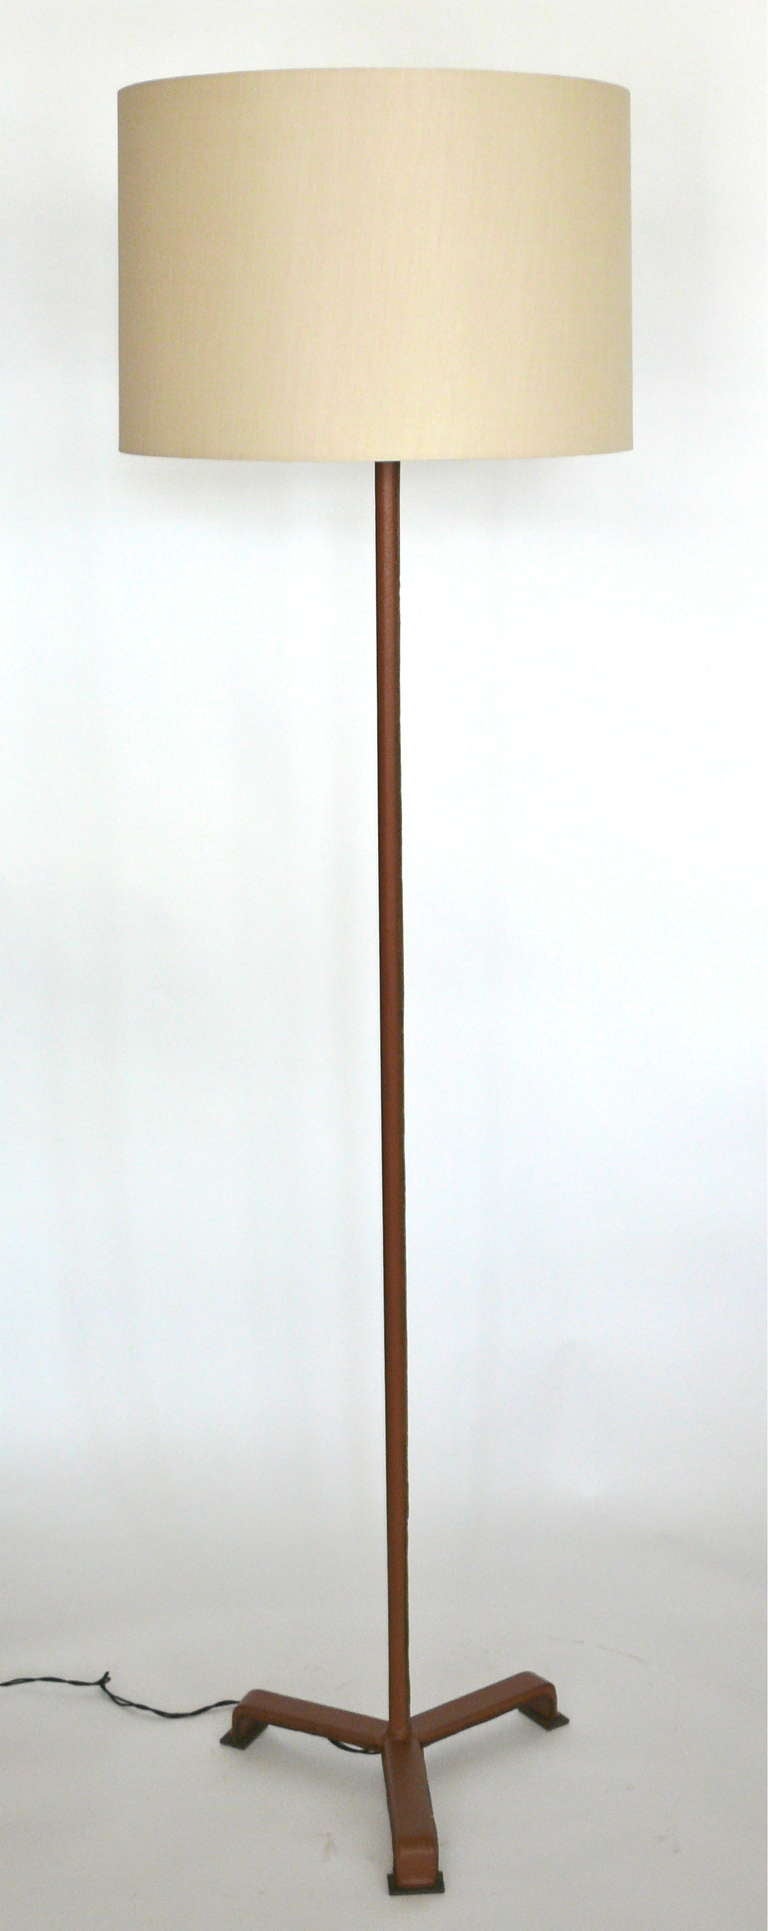 Handsome Jacques Adnet floor lamp, fully covered in a rich light brown leather with stitching. Leather has been newly dyed. Newly re-wired and new silk shade.